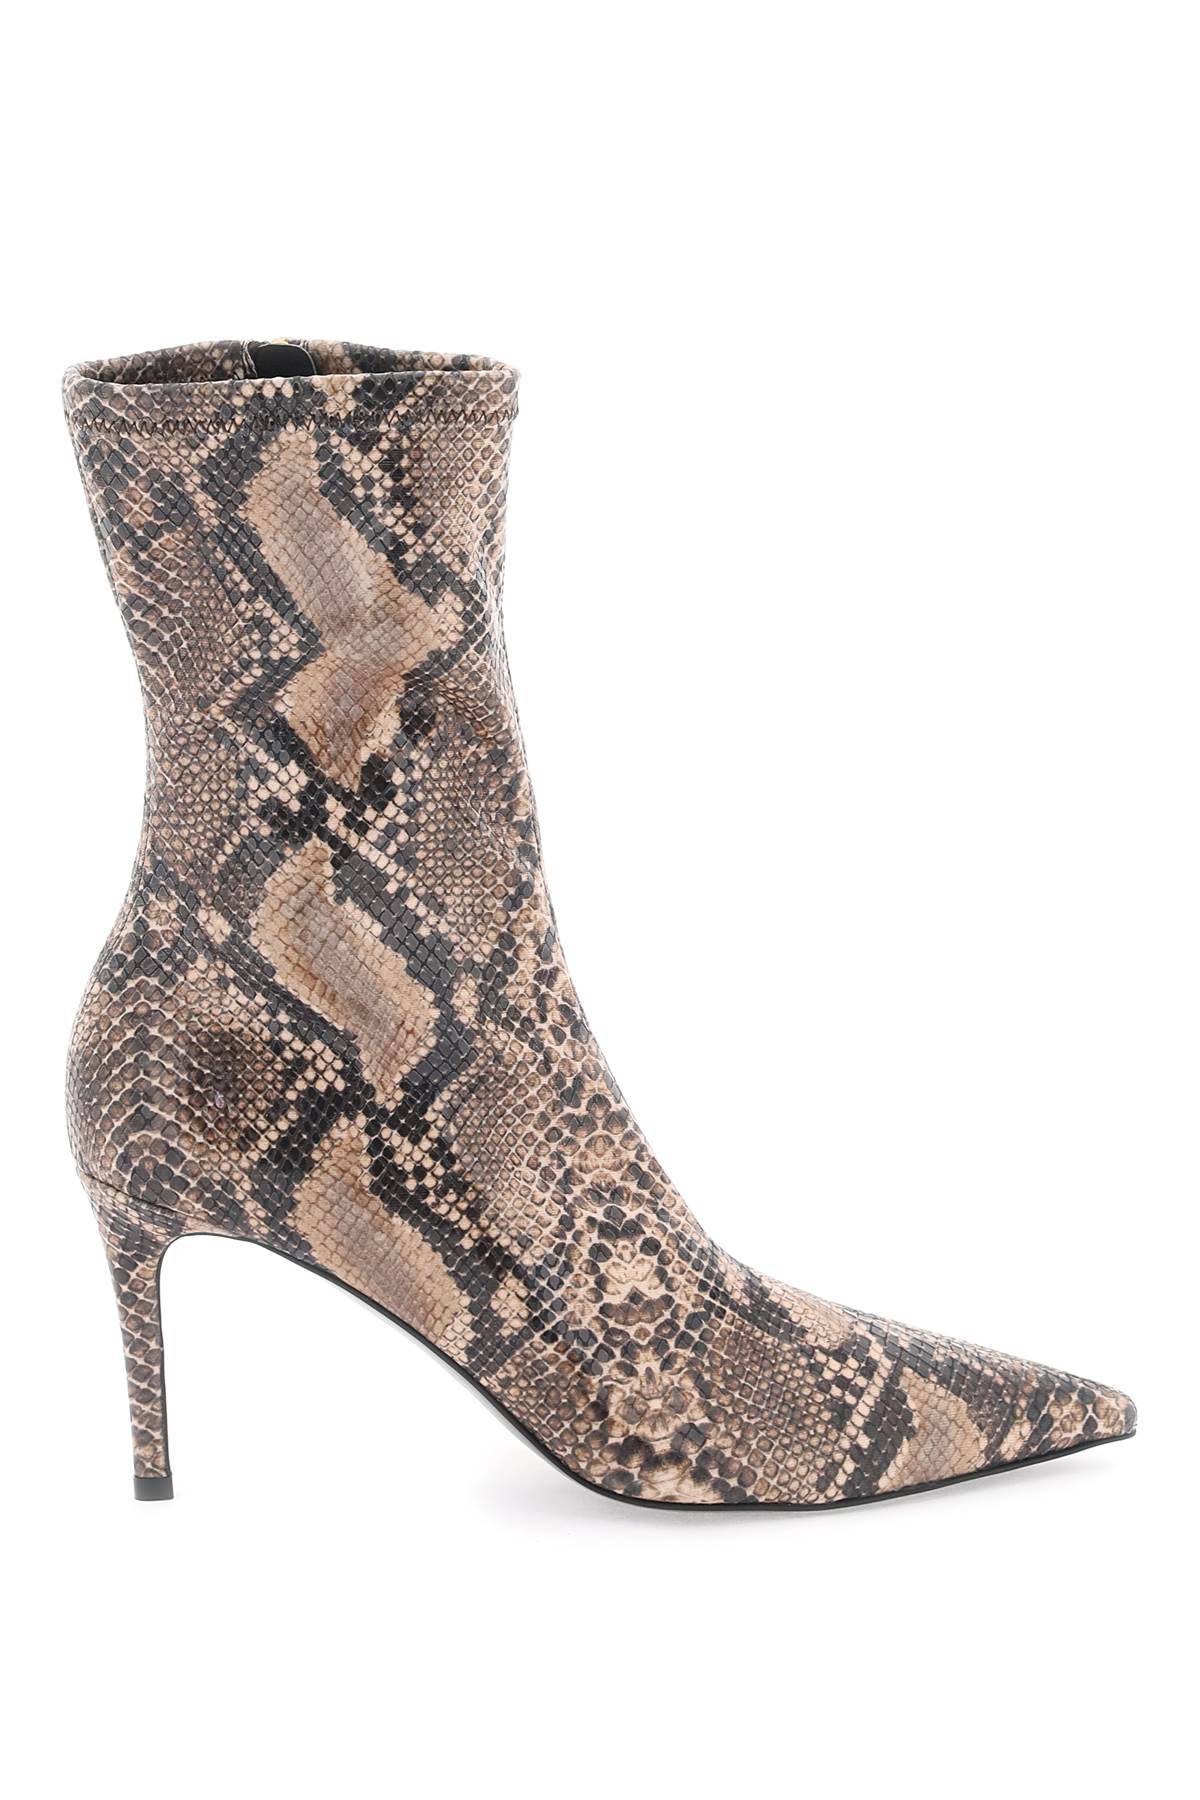 Stella Mccartney Python Print Ankle Boots In Brown